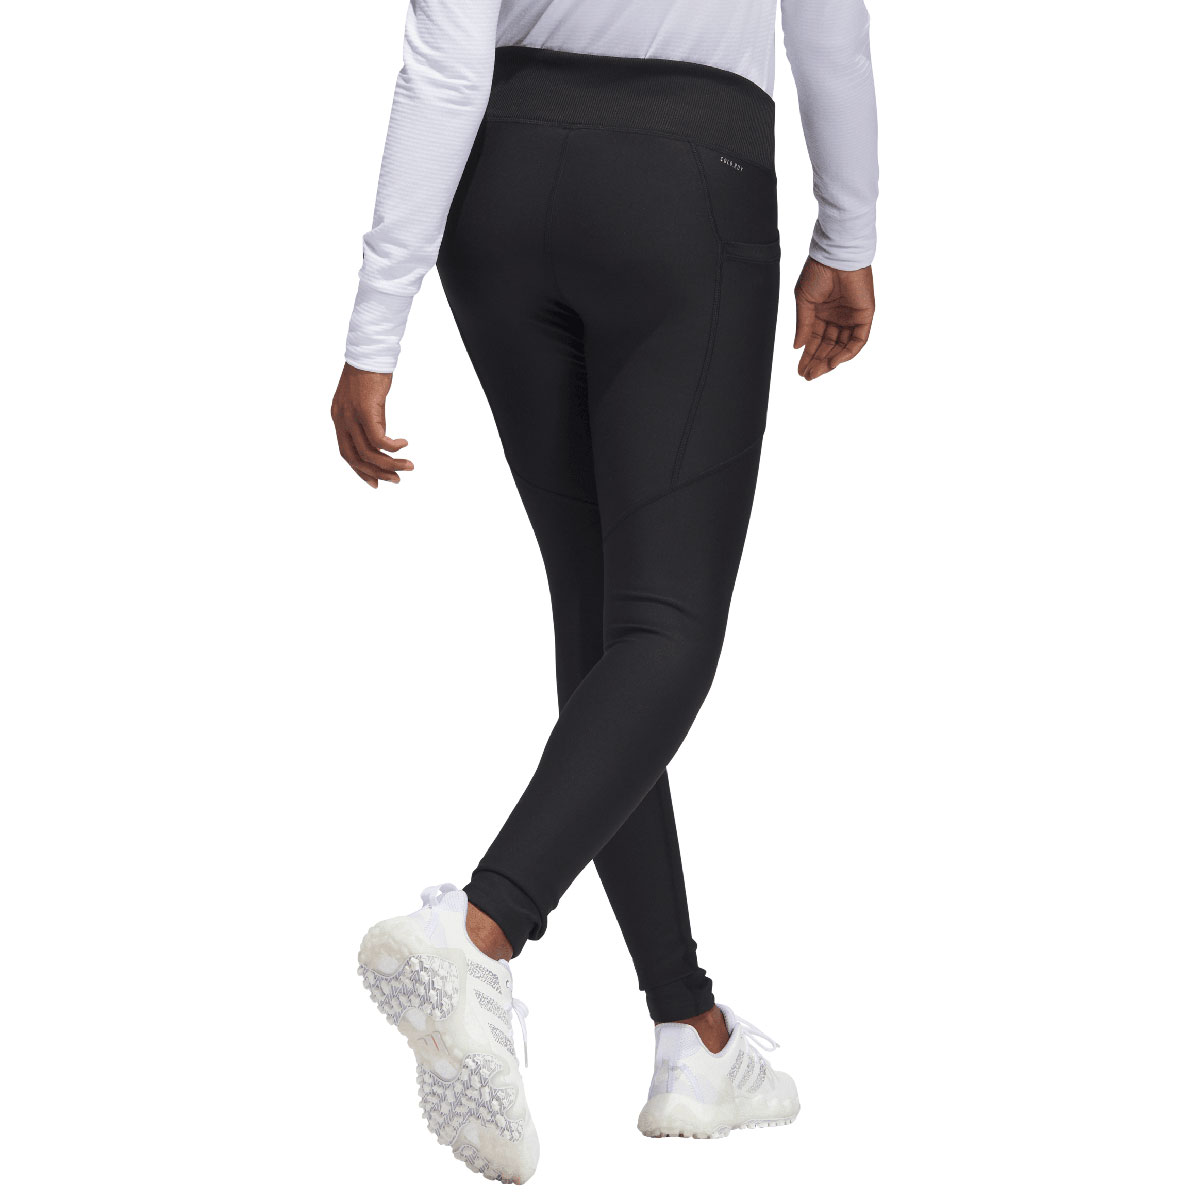 adidas Ladies COLD.RDY Golf Legging Trousers from american golf